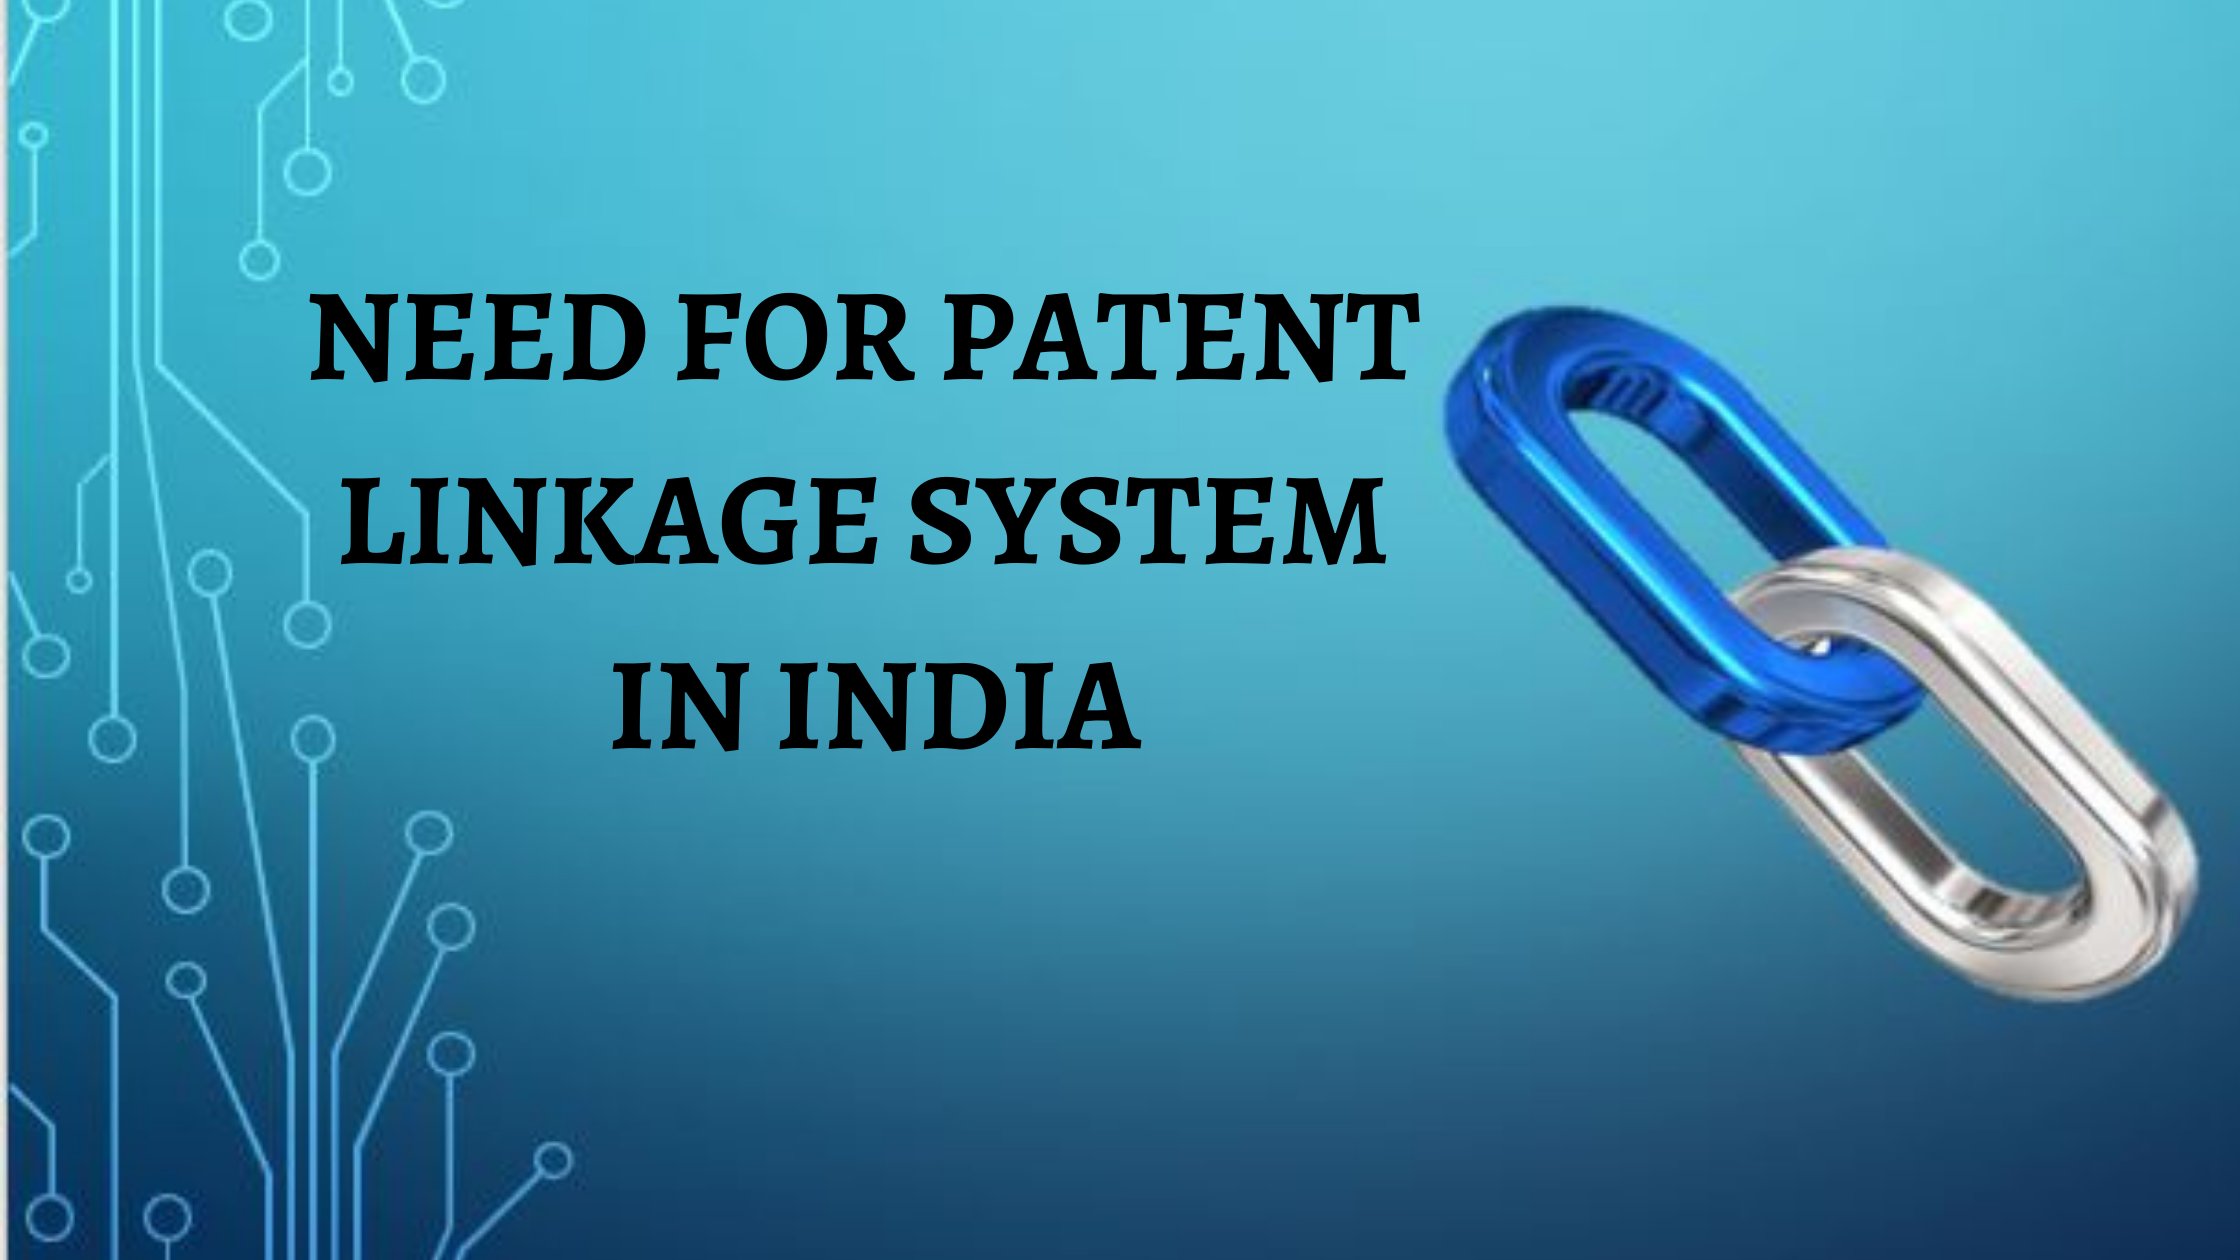 NEED FOR PATENT LINKAGE SYSTEM IN INDIA